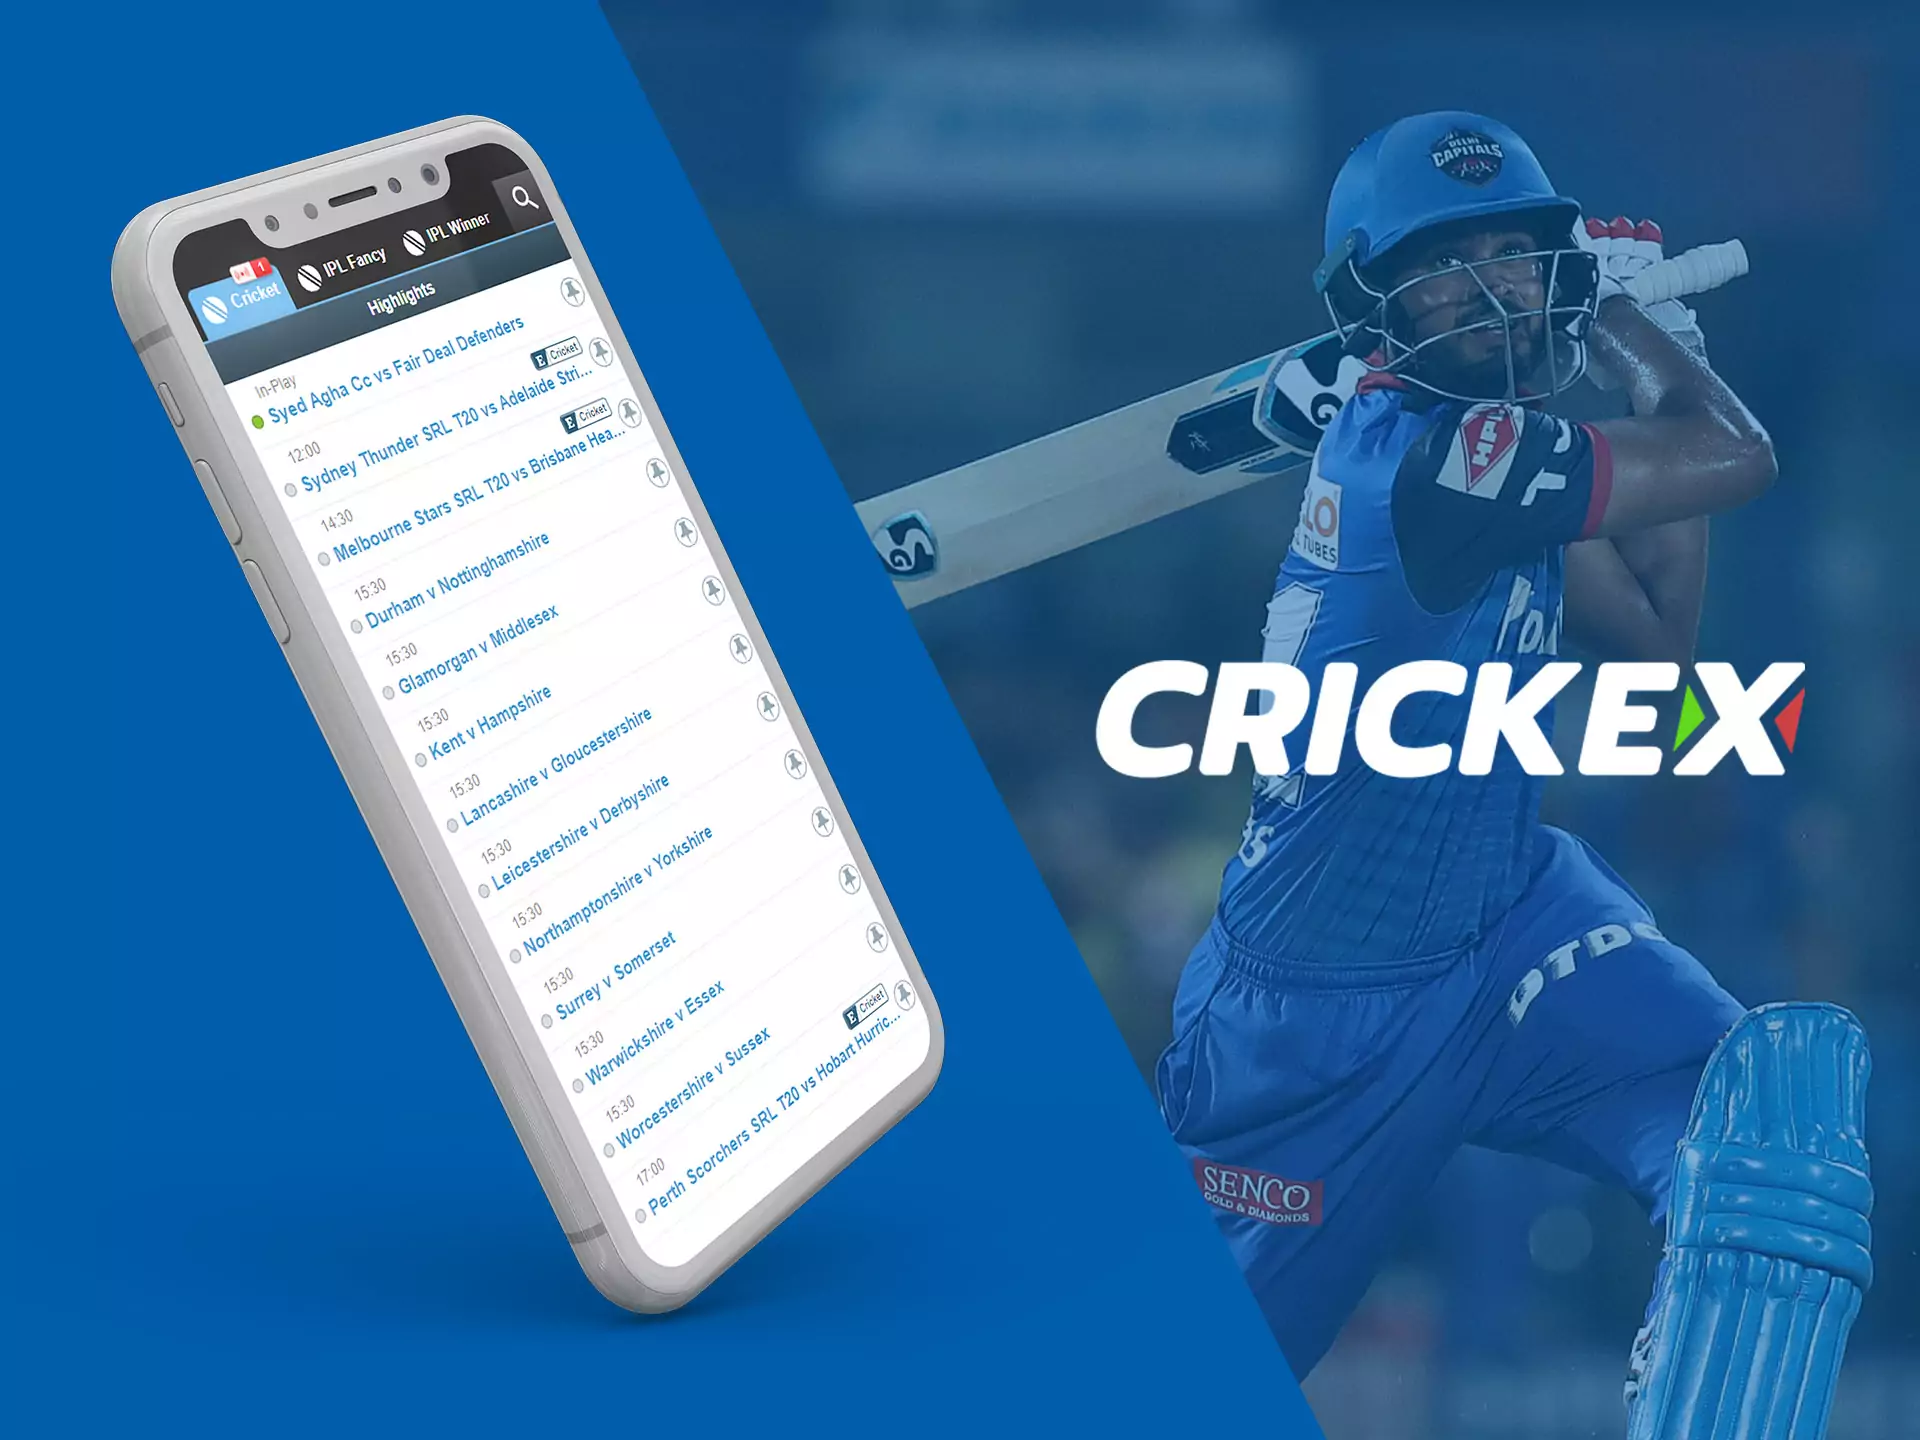 The Crickex app supports betting on major cricket tournaments.